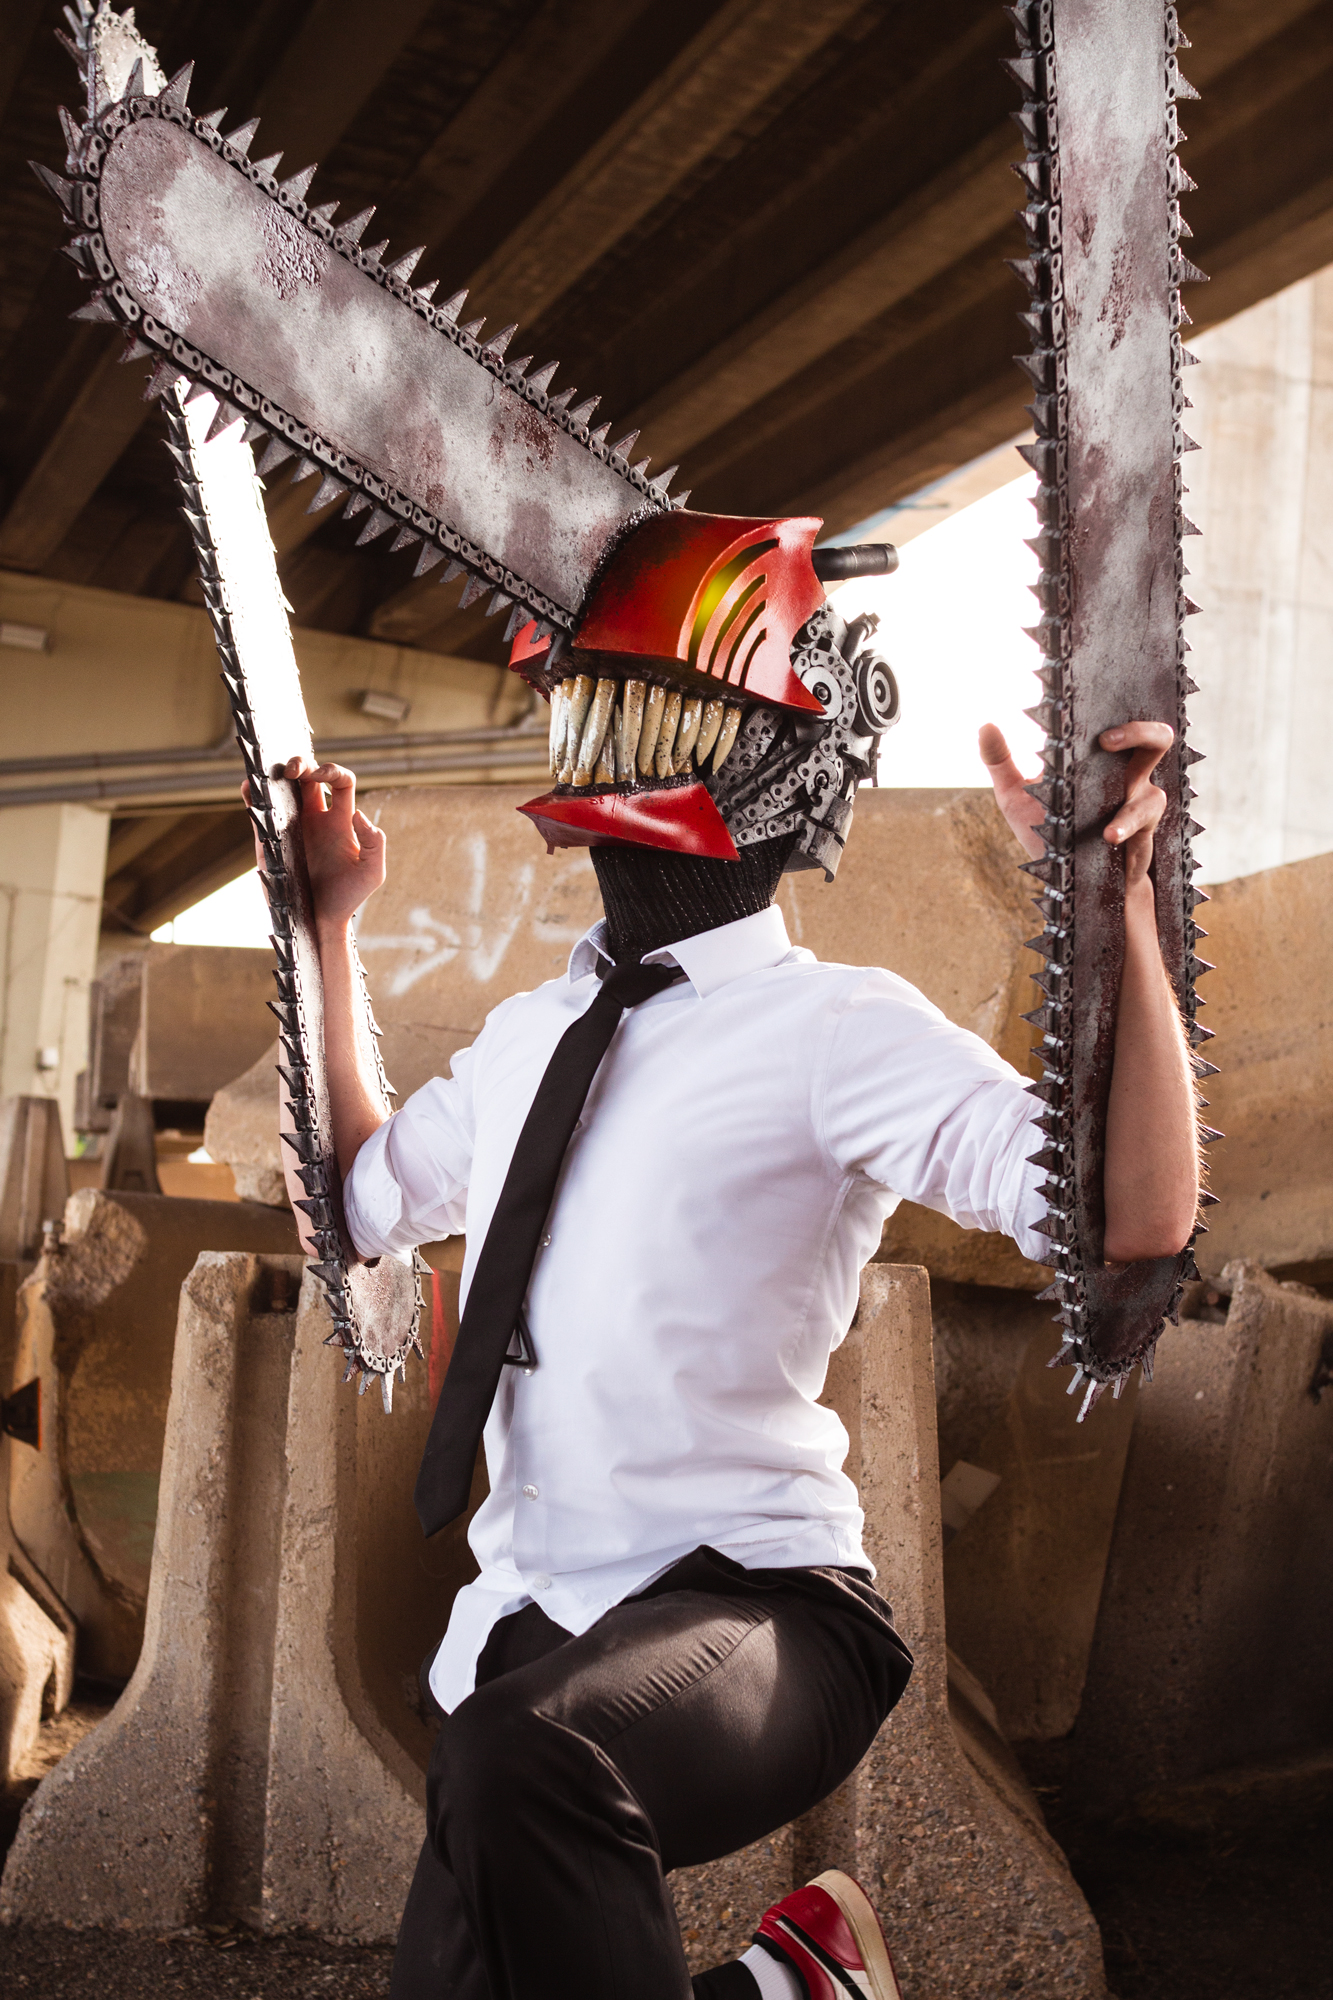 Chainsaw man cosplay by Andivicosplay on DeviantArt